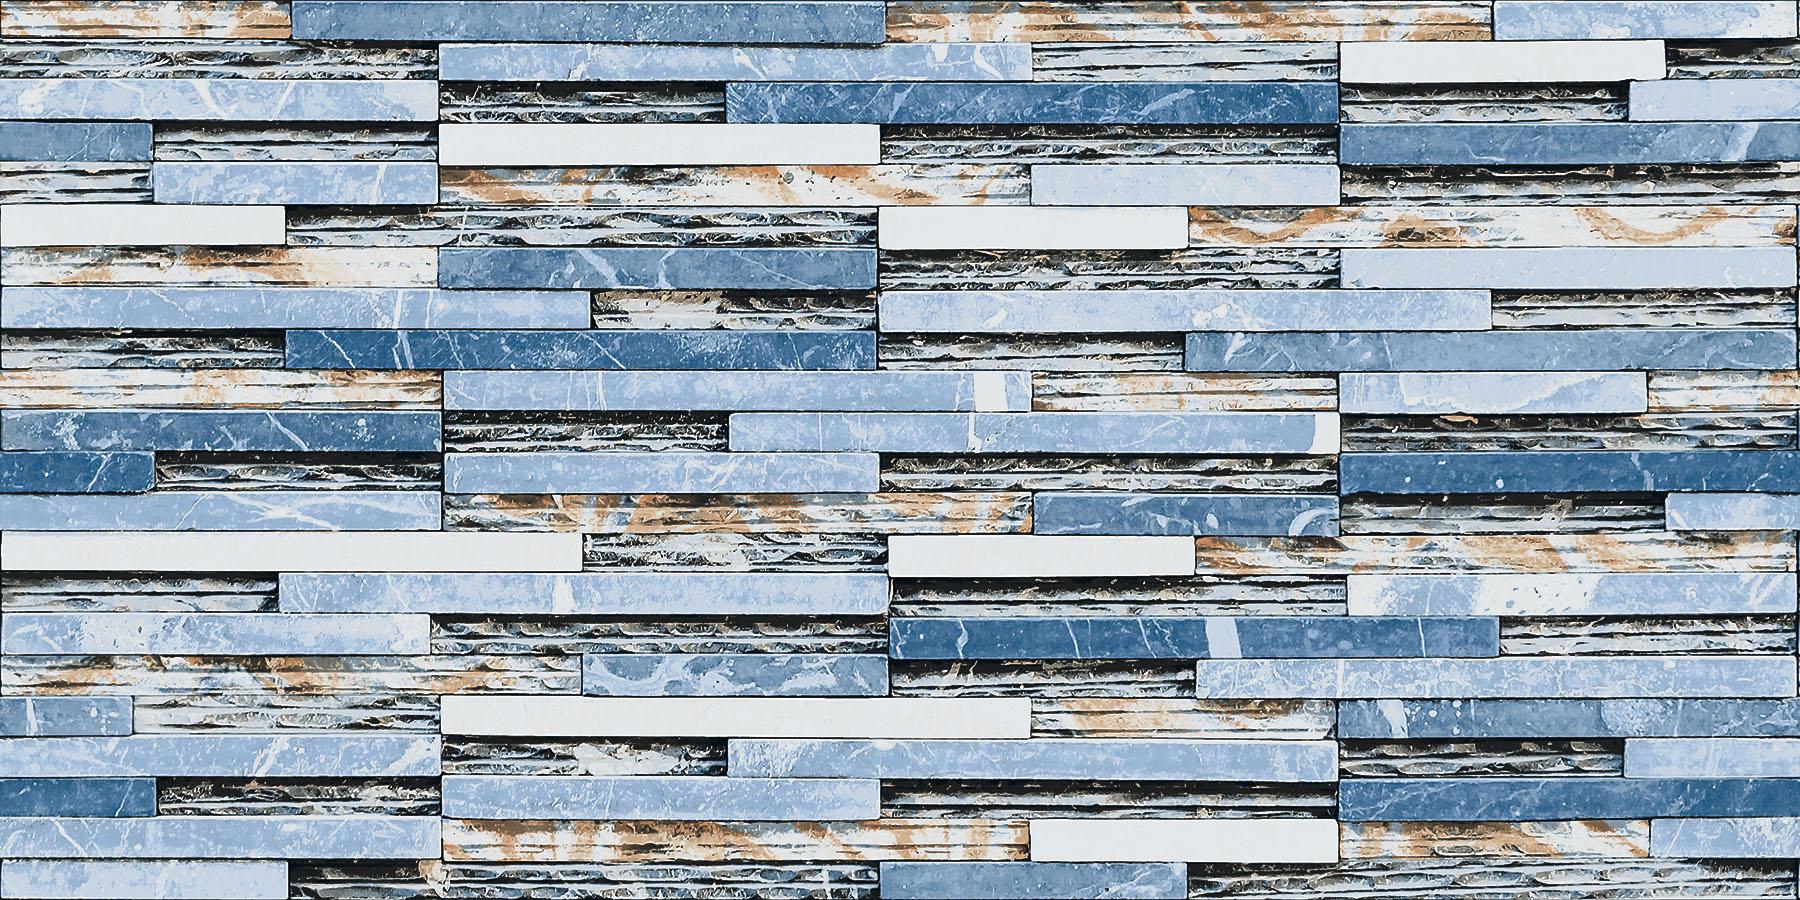 Stone Tiles for Bathroom Tiles, Living Room Tiles, Elevation Tiles, Accent Tiles, Hospital Tiles, Commercial/Office, Outdoor Area, School & Collages